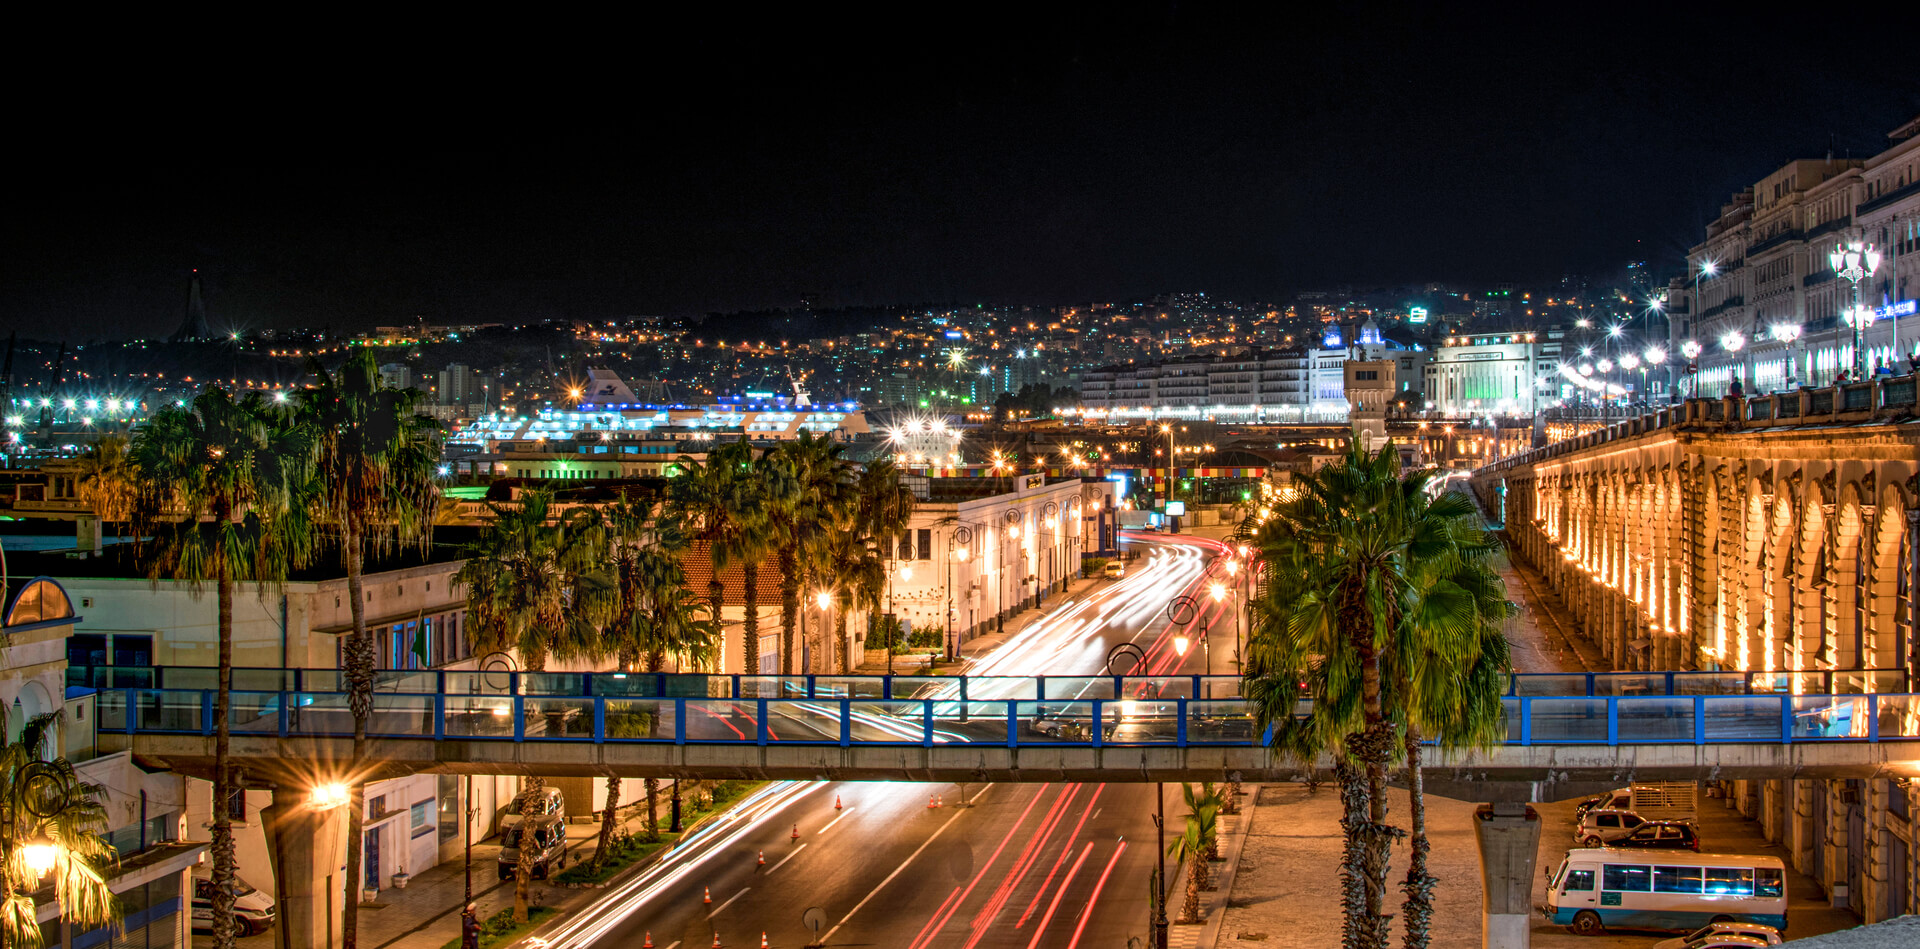 Algiers city by night (place des Martyrs)